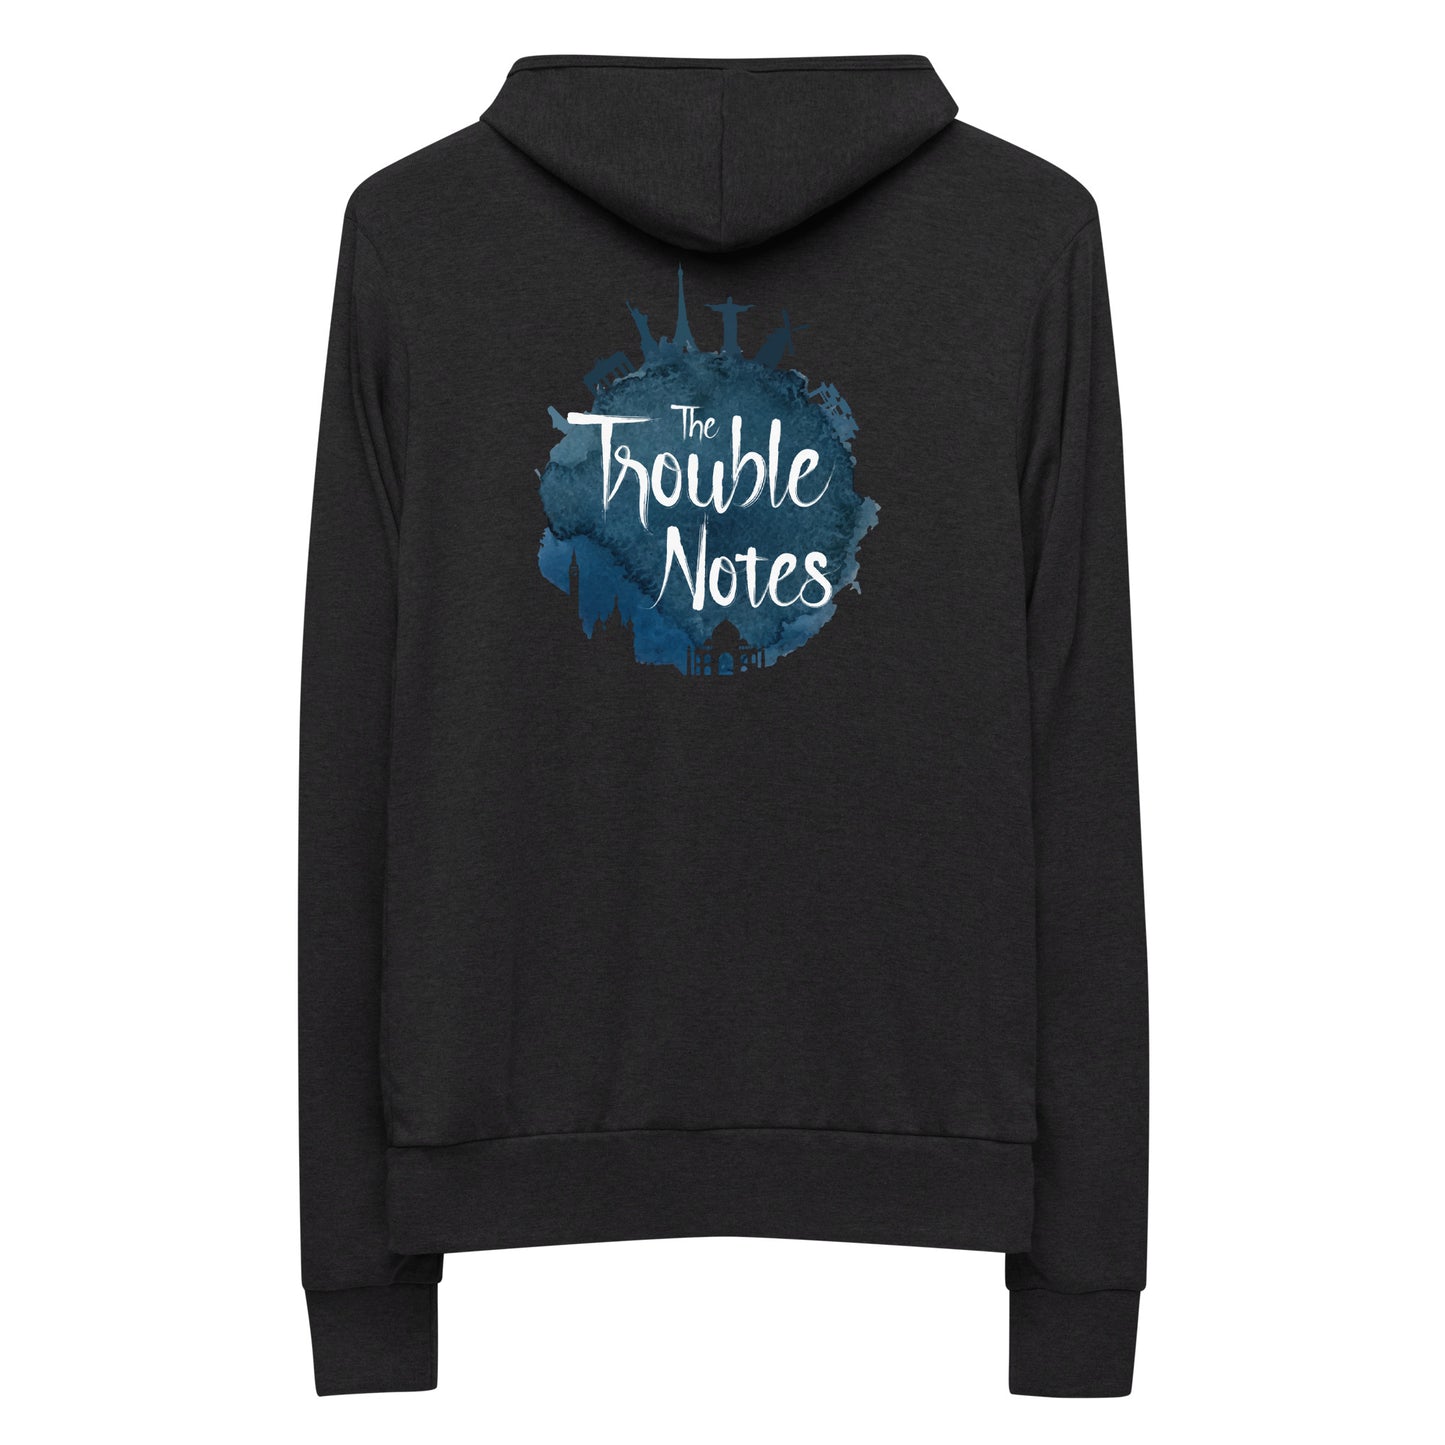 The Trouble Notes "Both Logos" WHITE (Print) Unisex Zip Hoodie